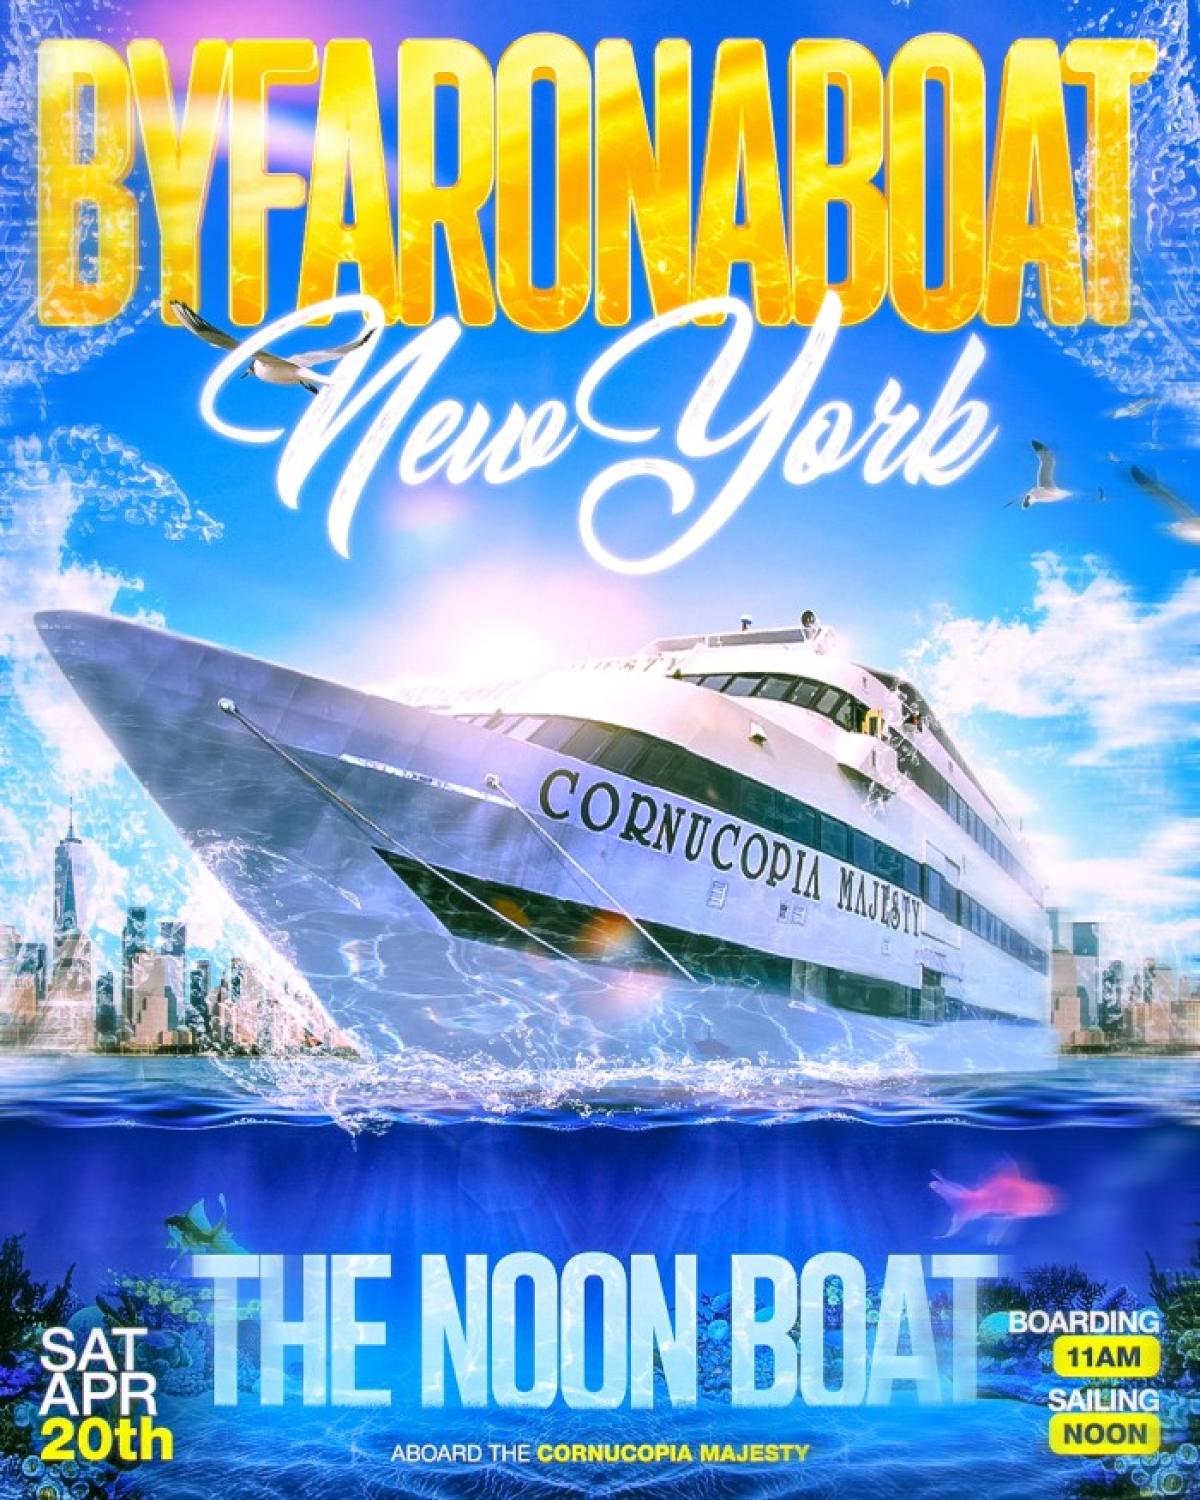 BYFAR On A Boat - Noon Boat flyer or graphic.